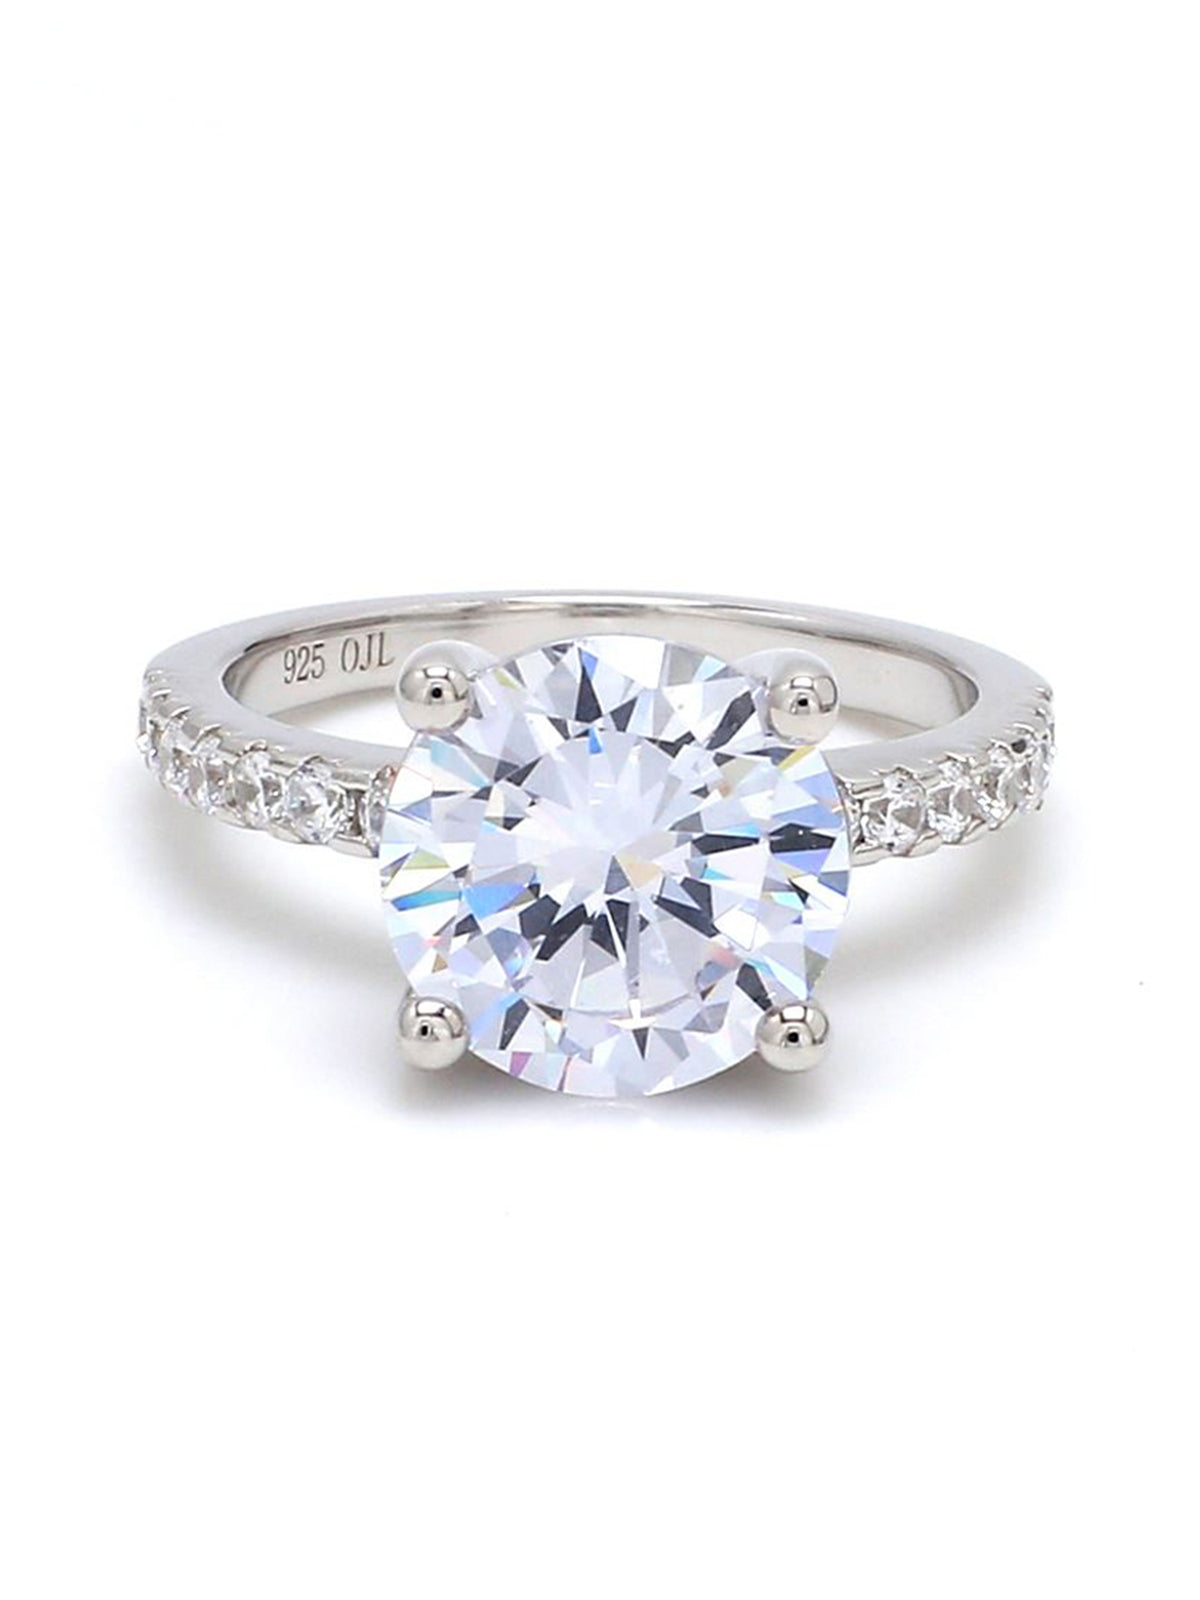 SOLITAIRE DIAMOND LOOK 925 SILVER RING